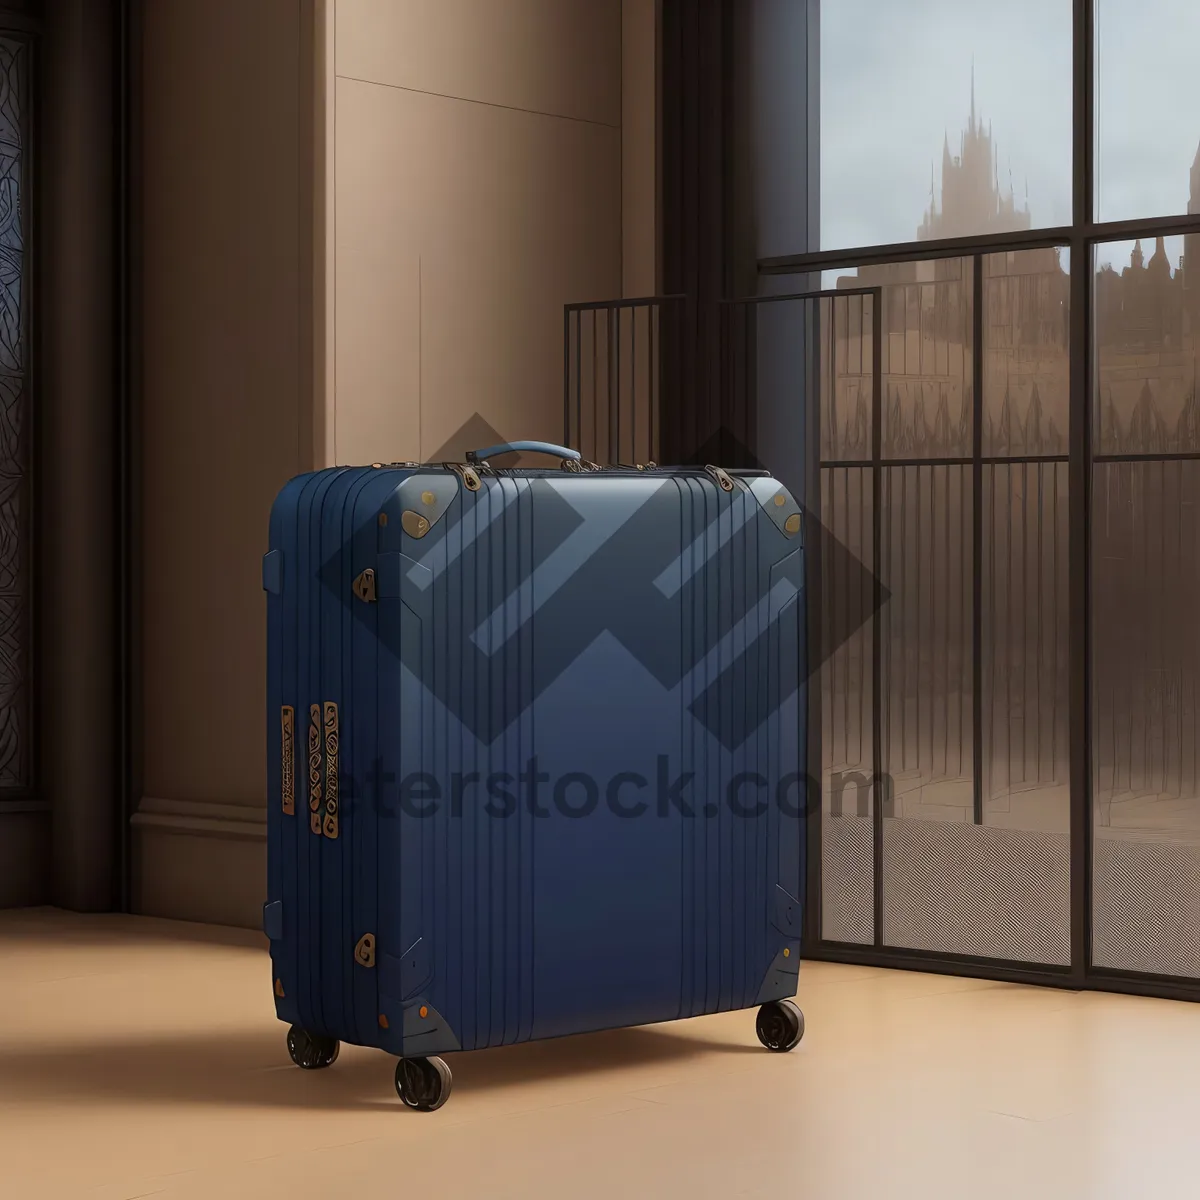 Picture of Versatile Storage Solution: Box with Locker and Bag